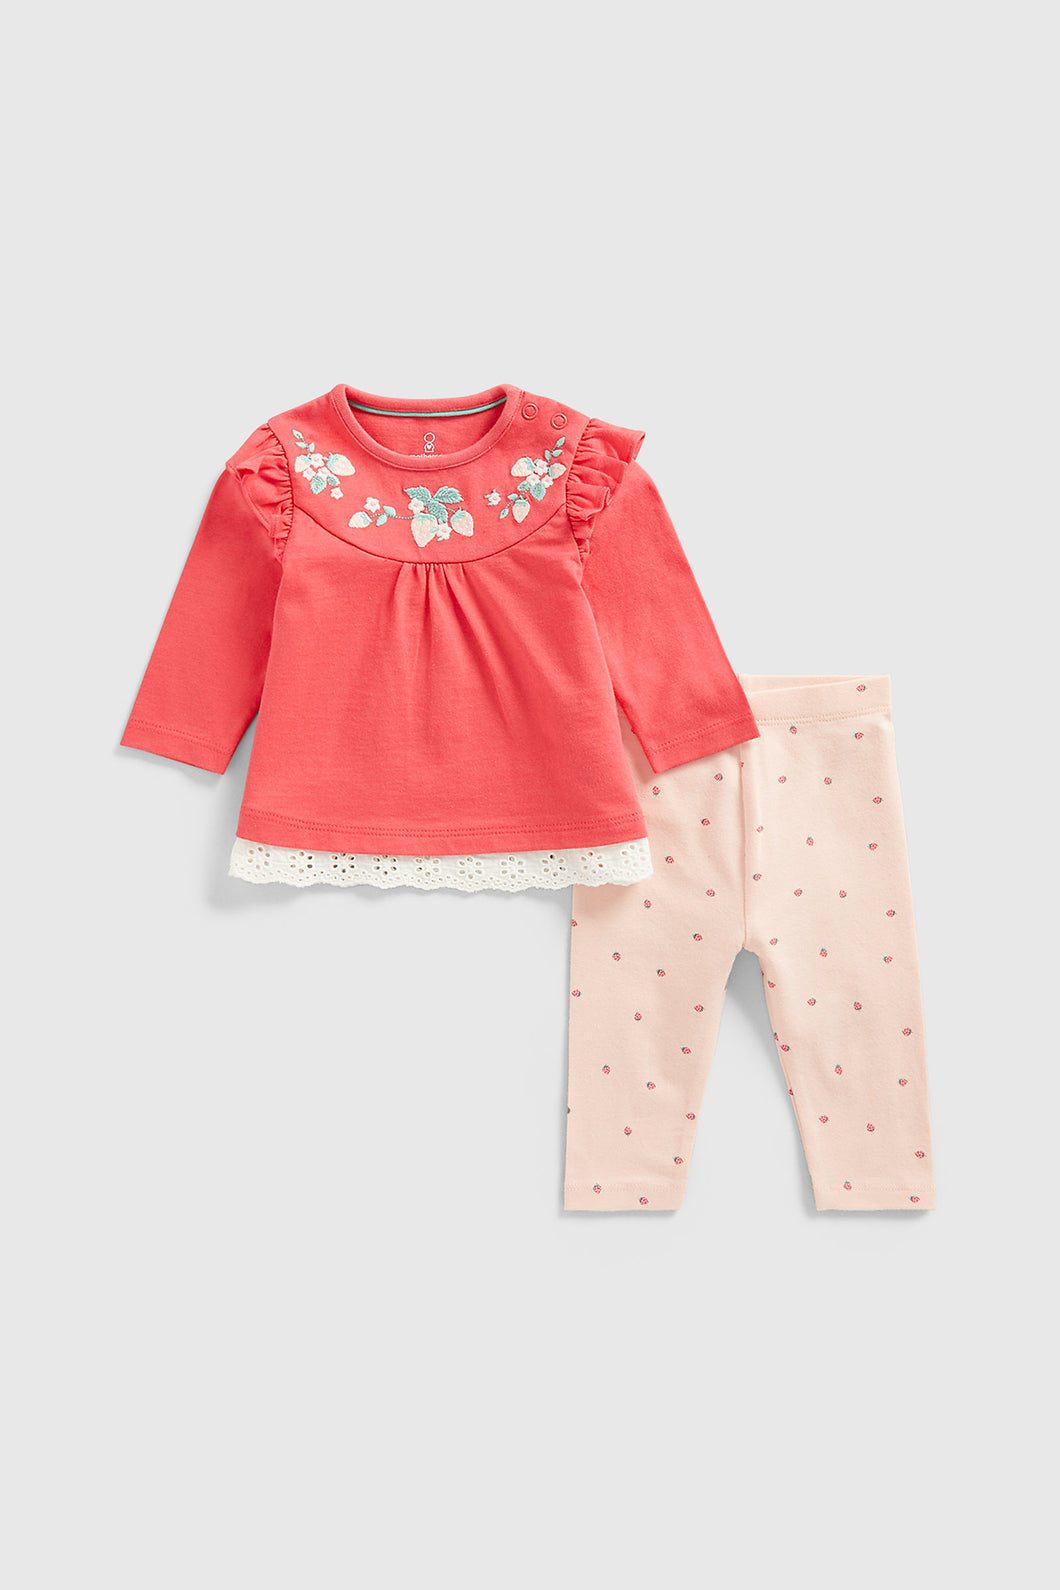 Mothercare Strawberry Top And Leggings Set